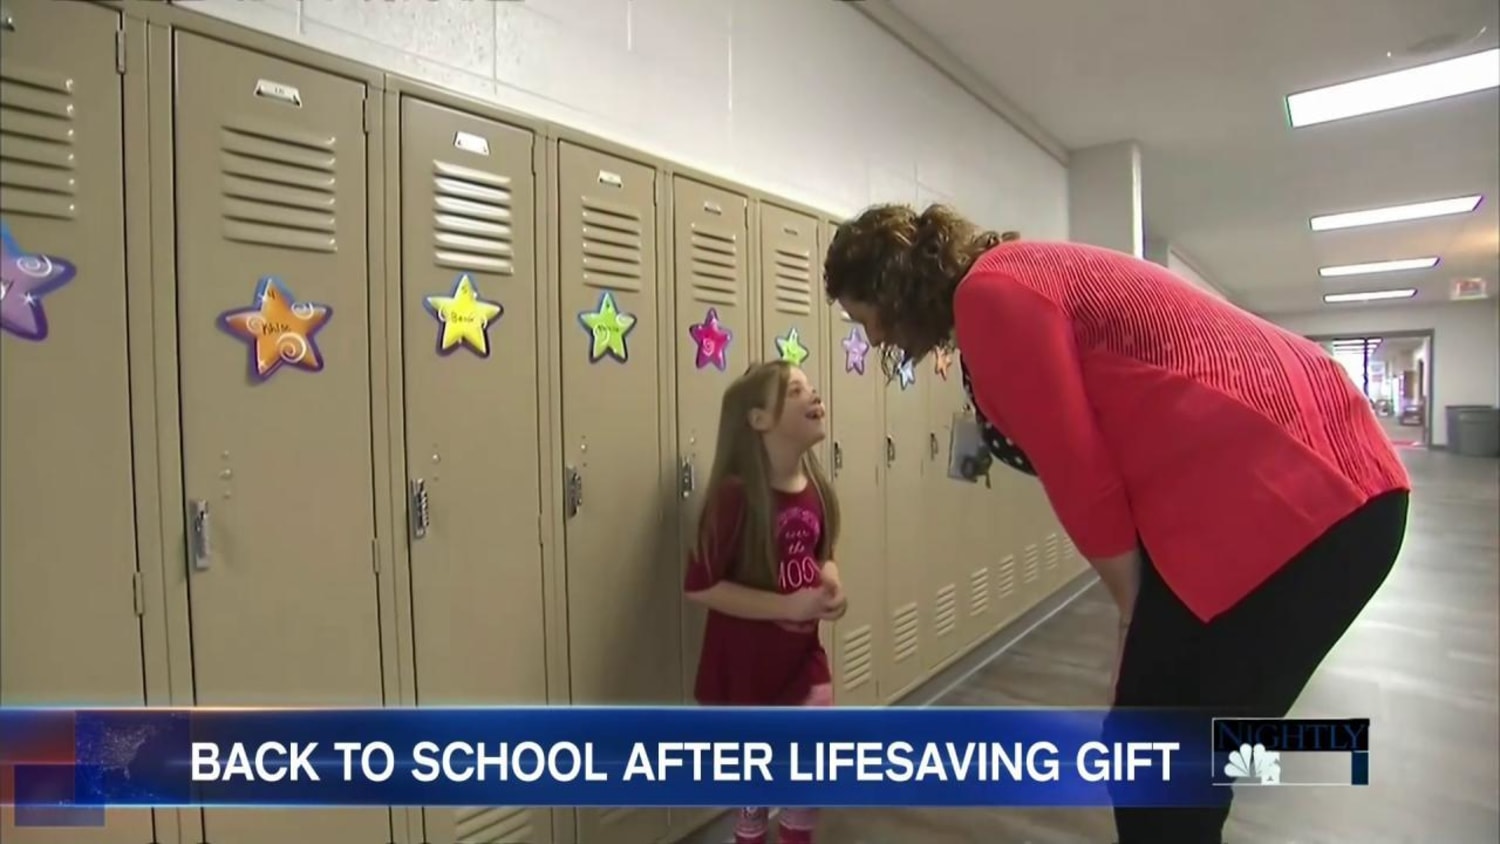 School Girl Xxnx - It's Back to School for 8-Year-Old Girl After Lifesaving Gift